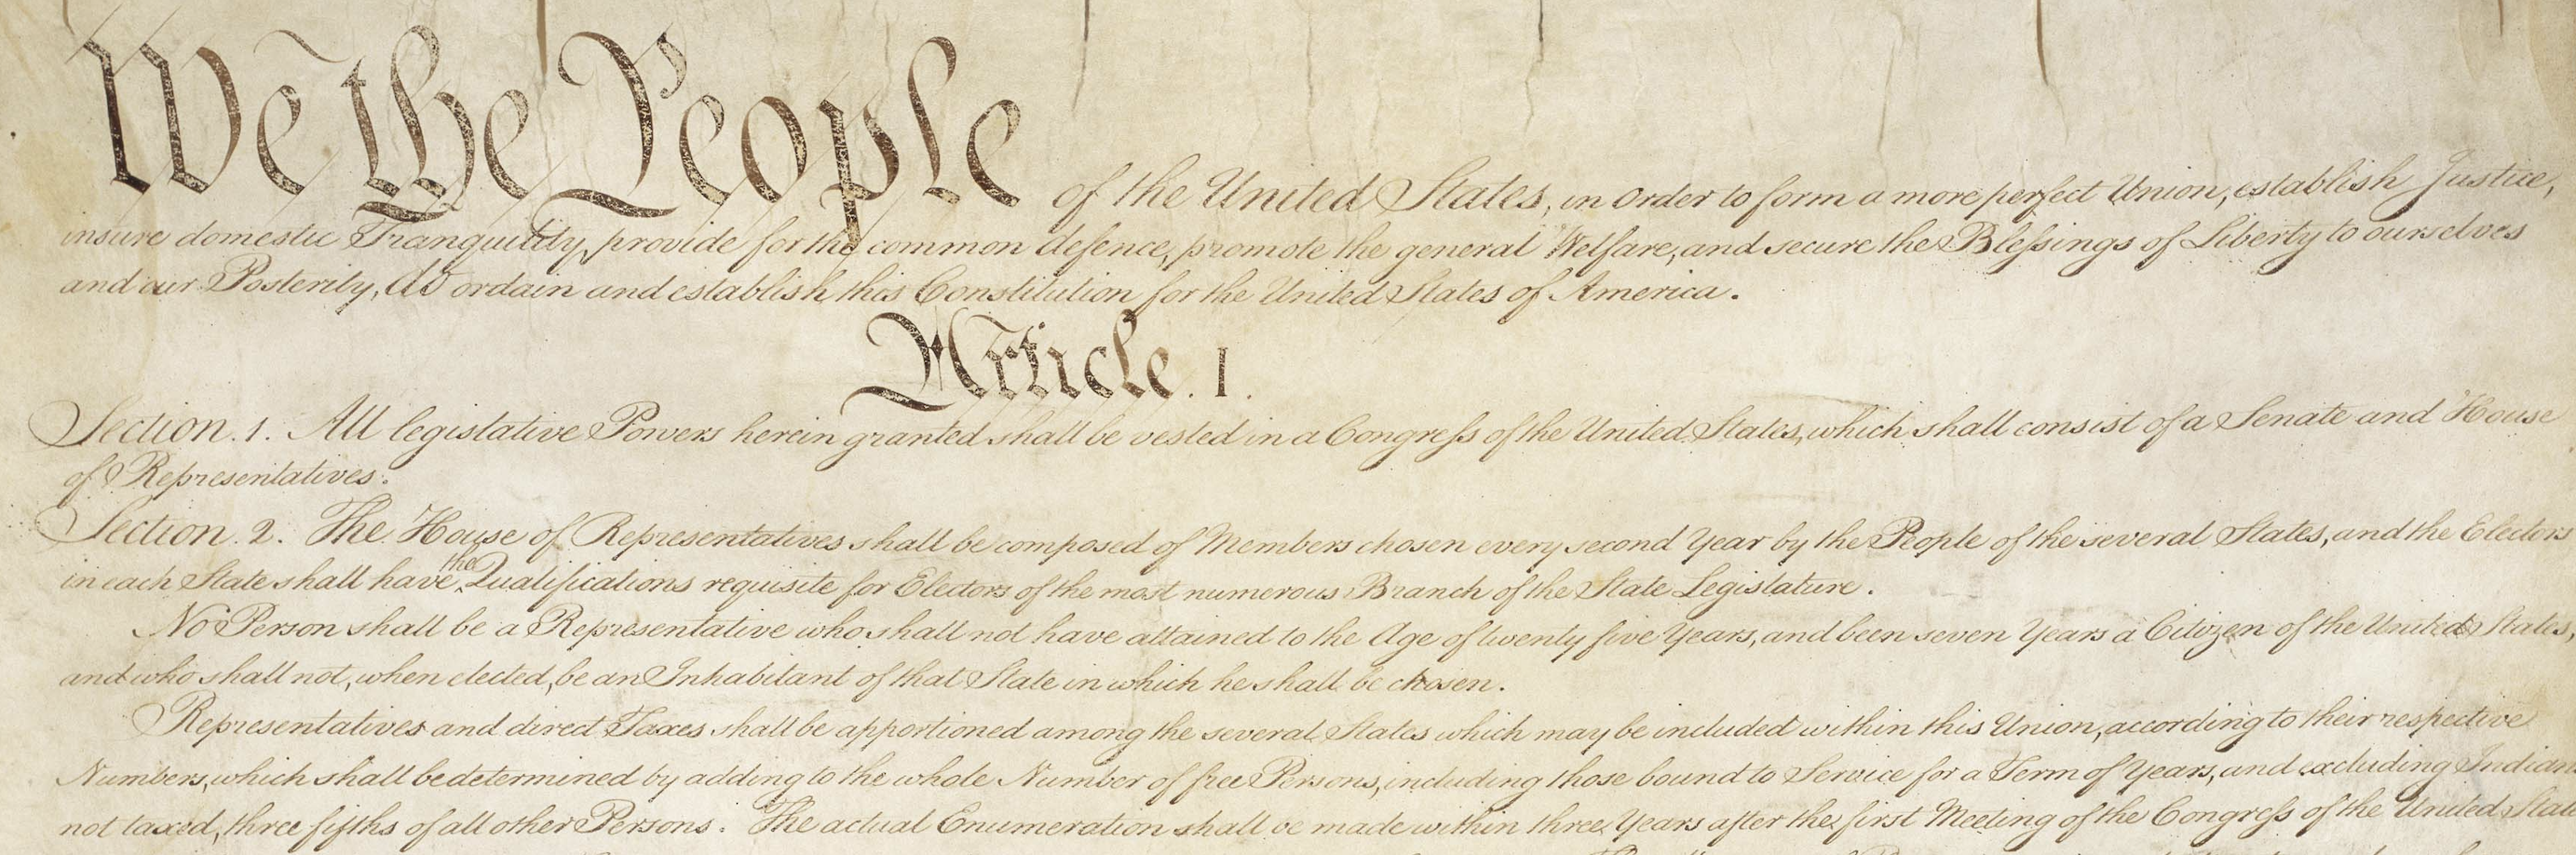 A photo of the preamble and part of Article I of the U.S. Constitution